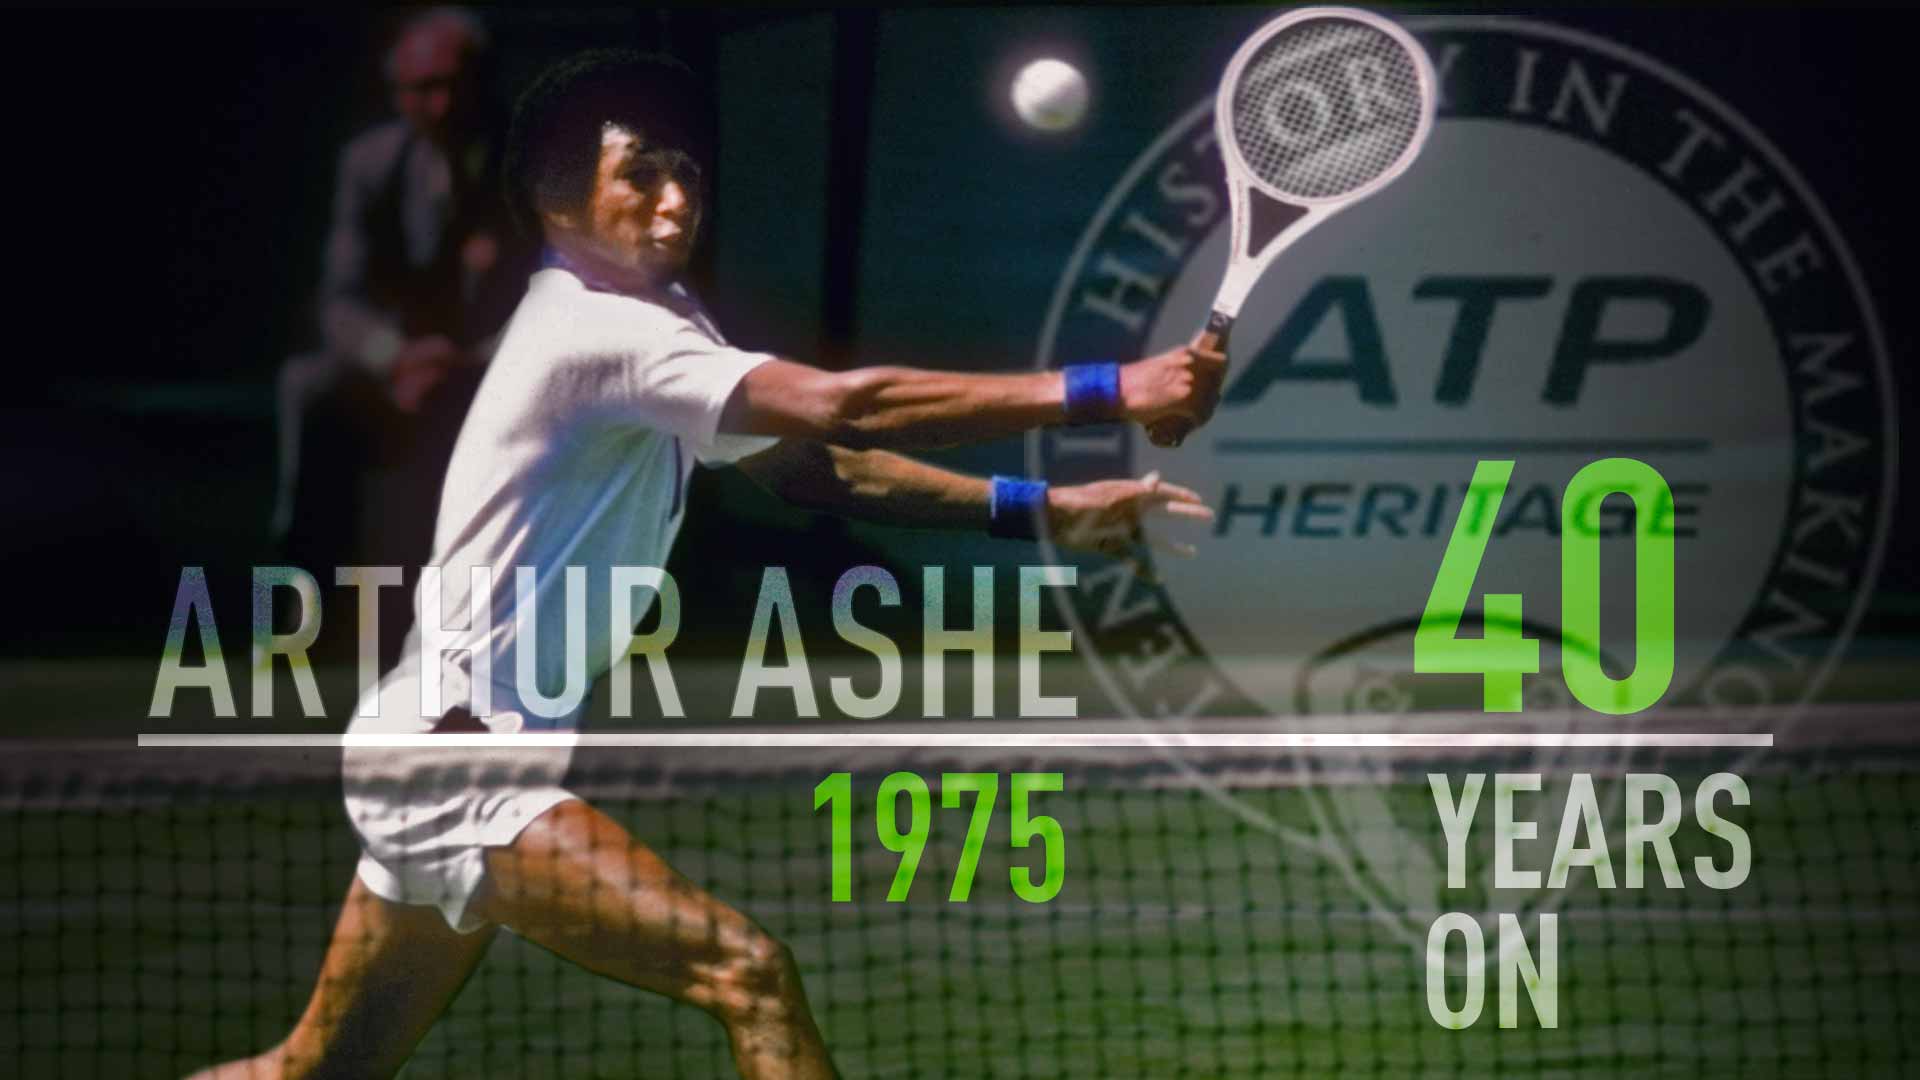 On Saturday, 5 July 1975, Arthur Ashe beat Jimmy Connors 6-1, 6-1, 5-7, 6-4 on Centre Court for the Wimbledon title.